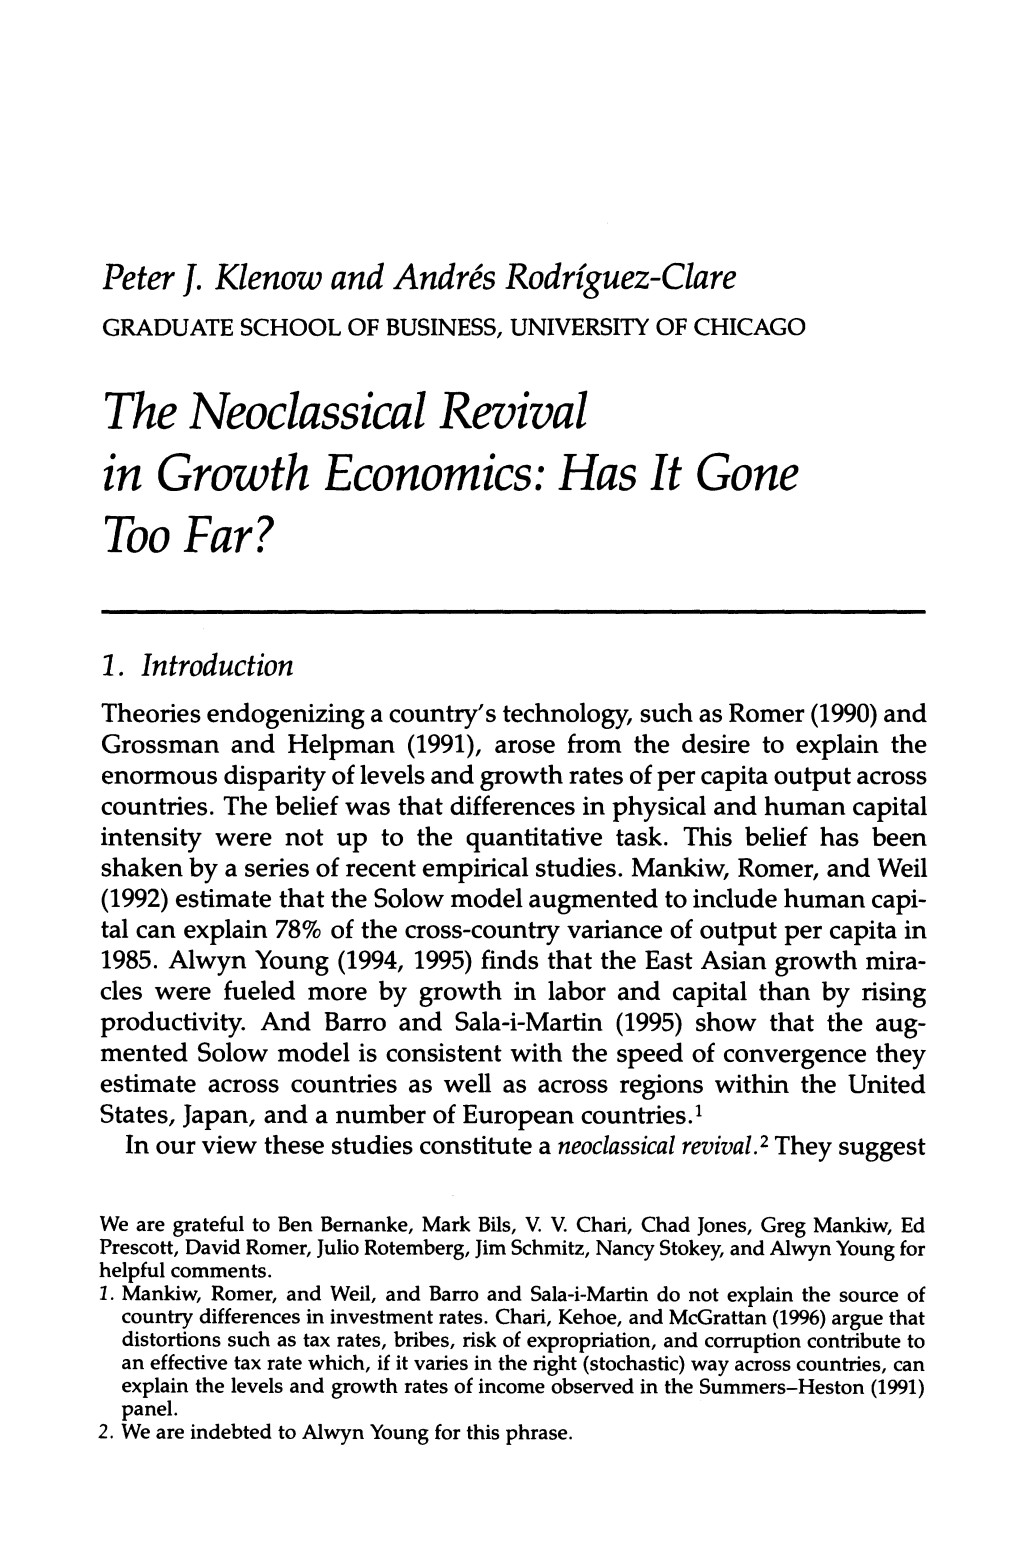 The Neoclassical Revival in Growth Economics: Has It Gone Too Far?